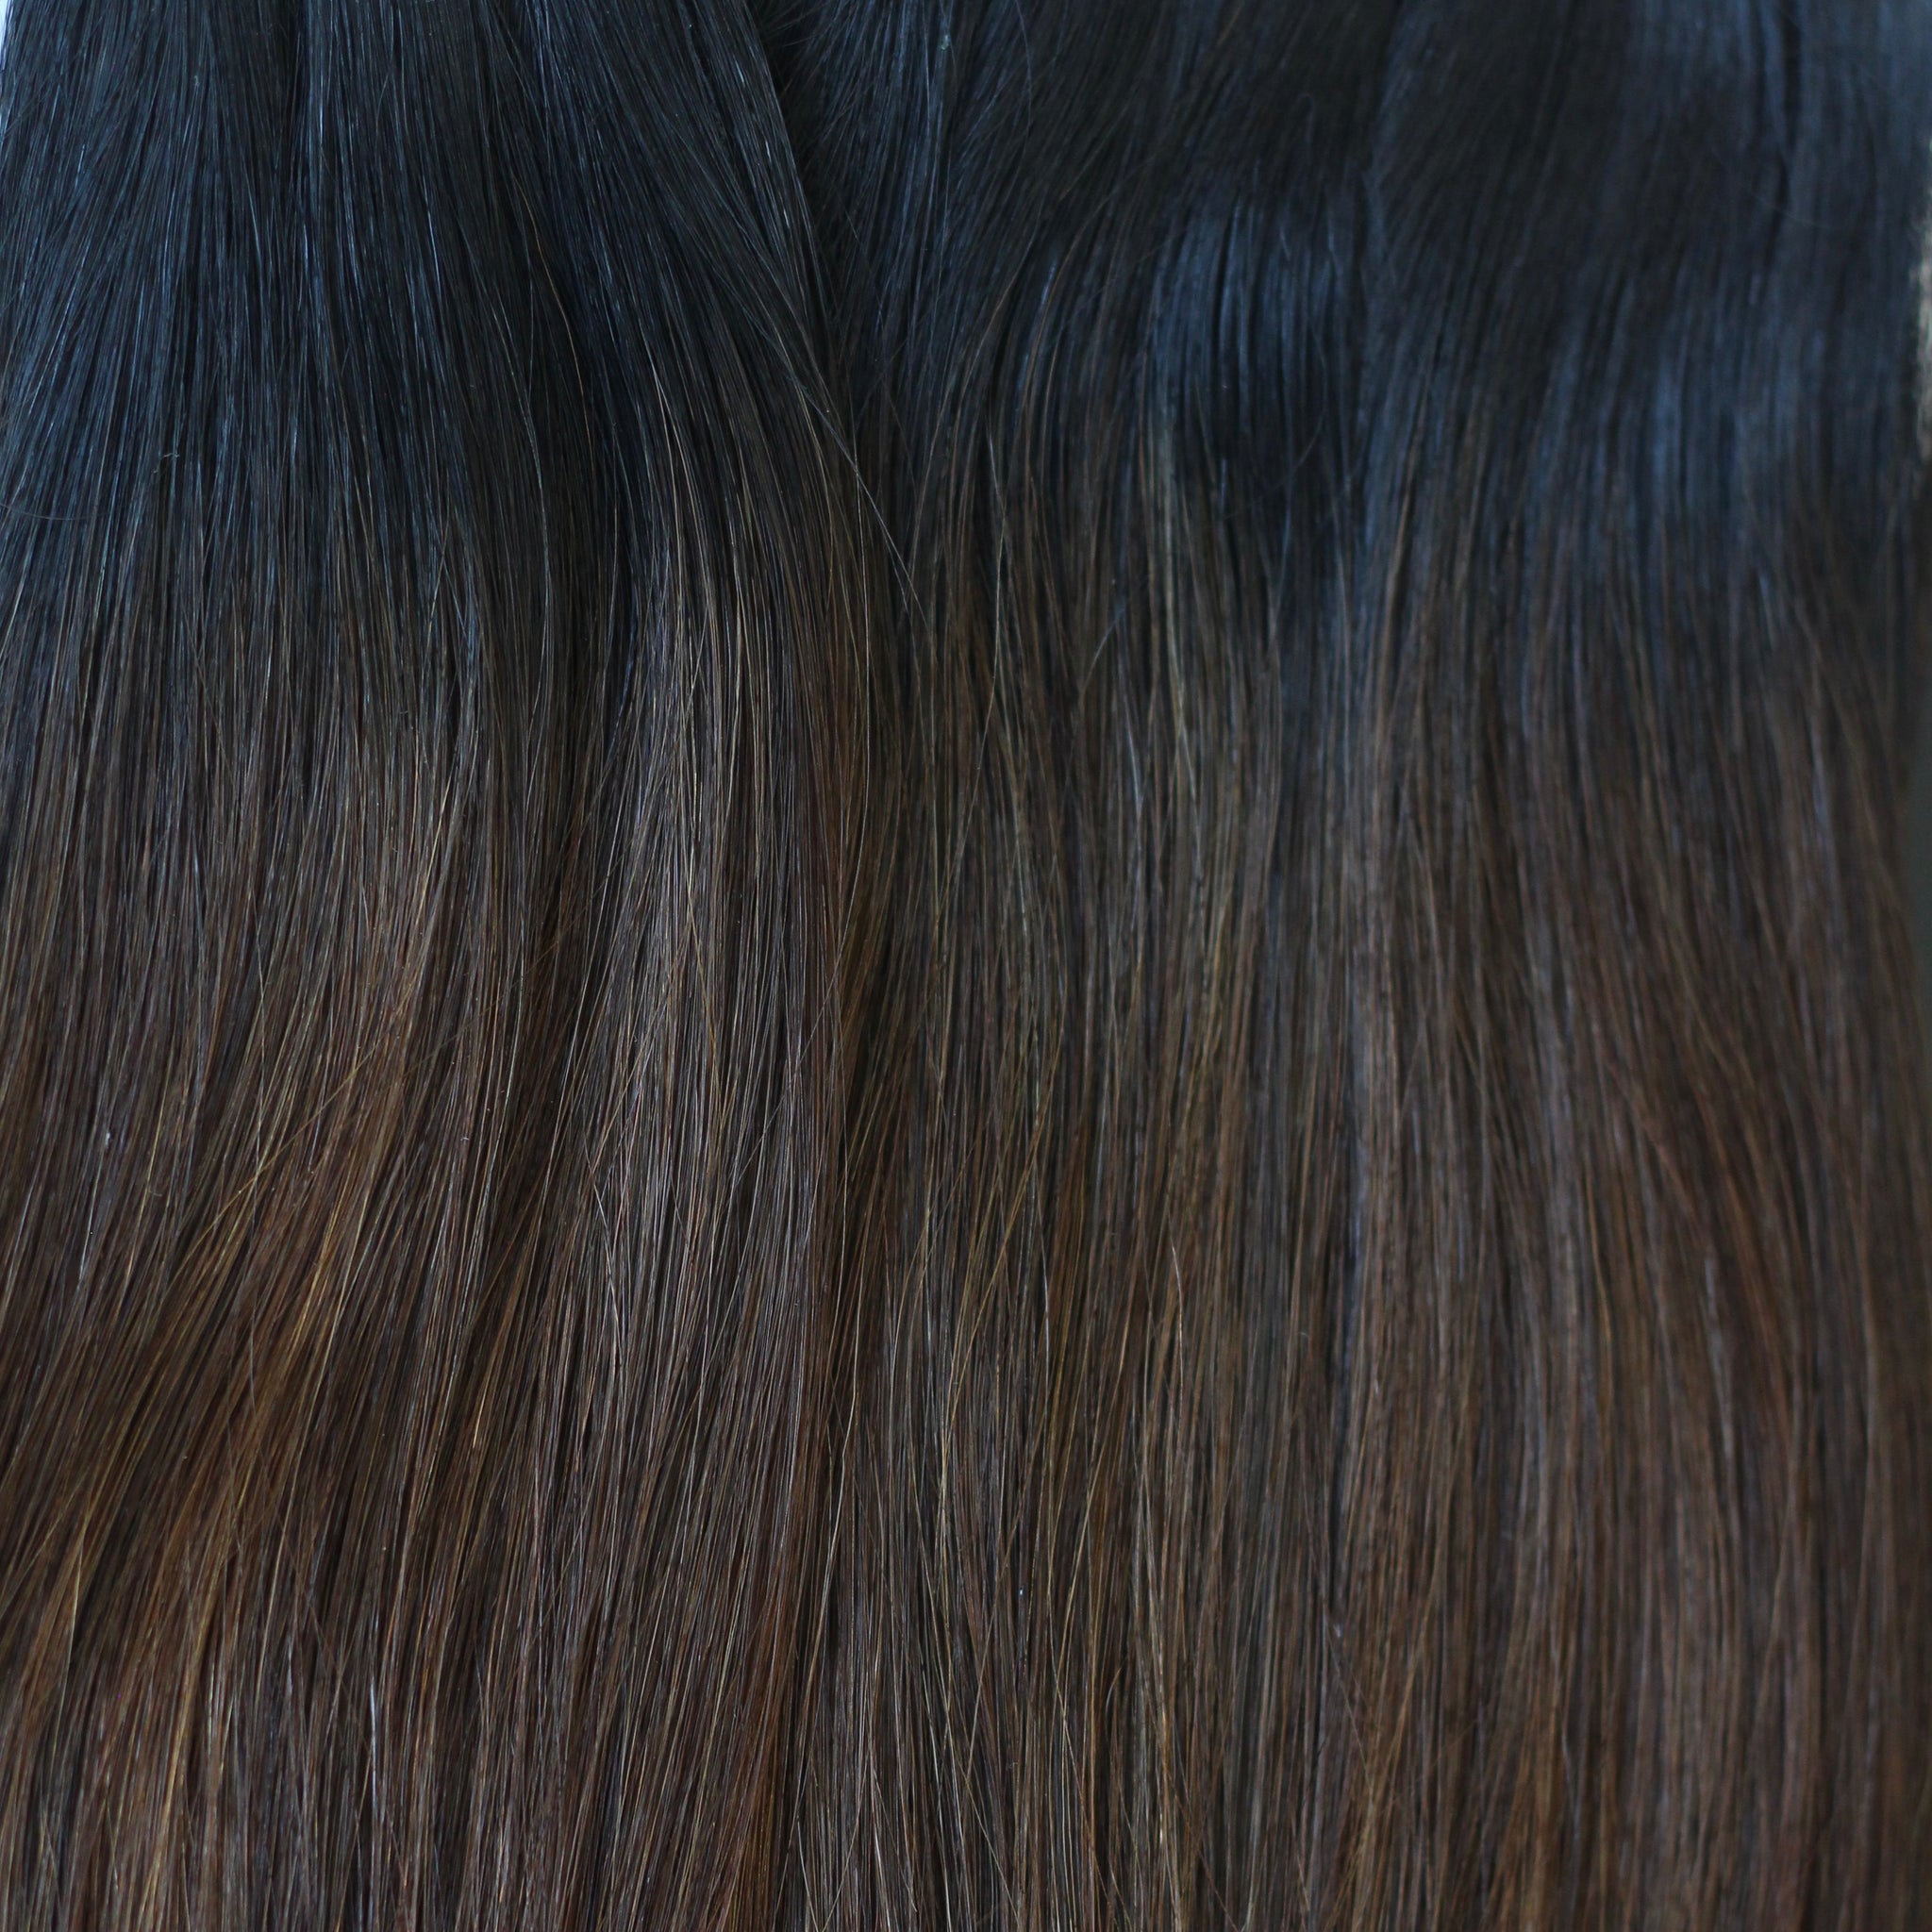 Rooted Deep Terra Brown Piano - Luxe Hand Tied Wefts